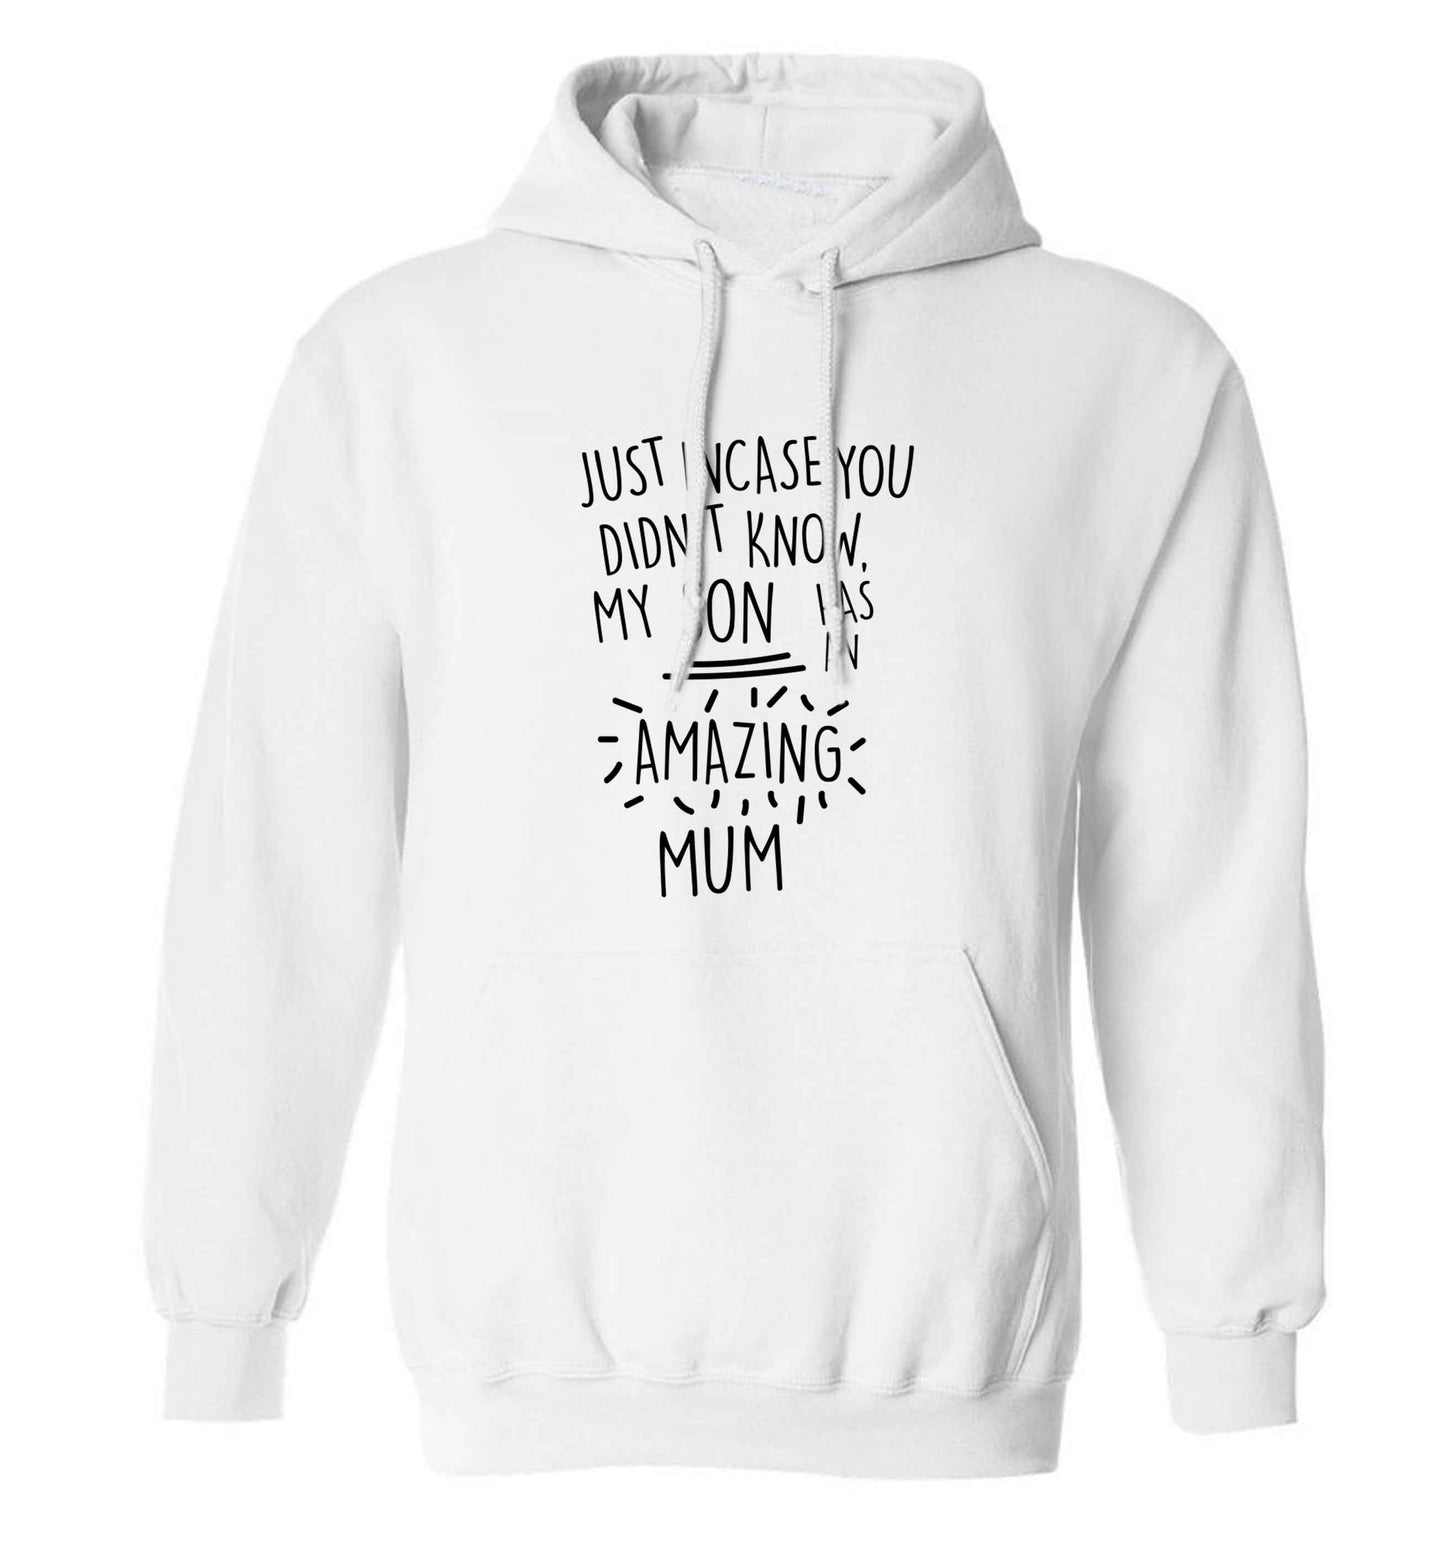 Just incase you didn't know my son has an amazing mum adults unisex white hoodie 2XL